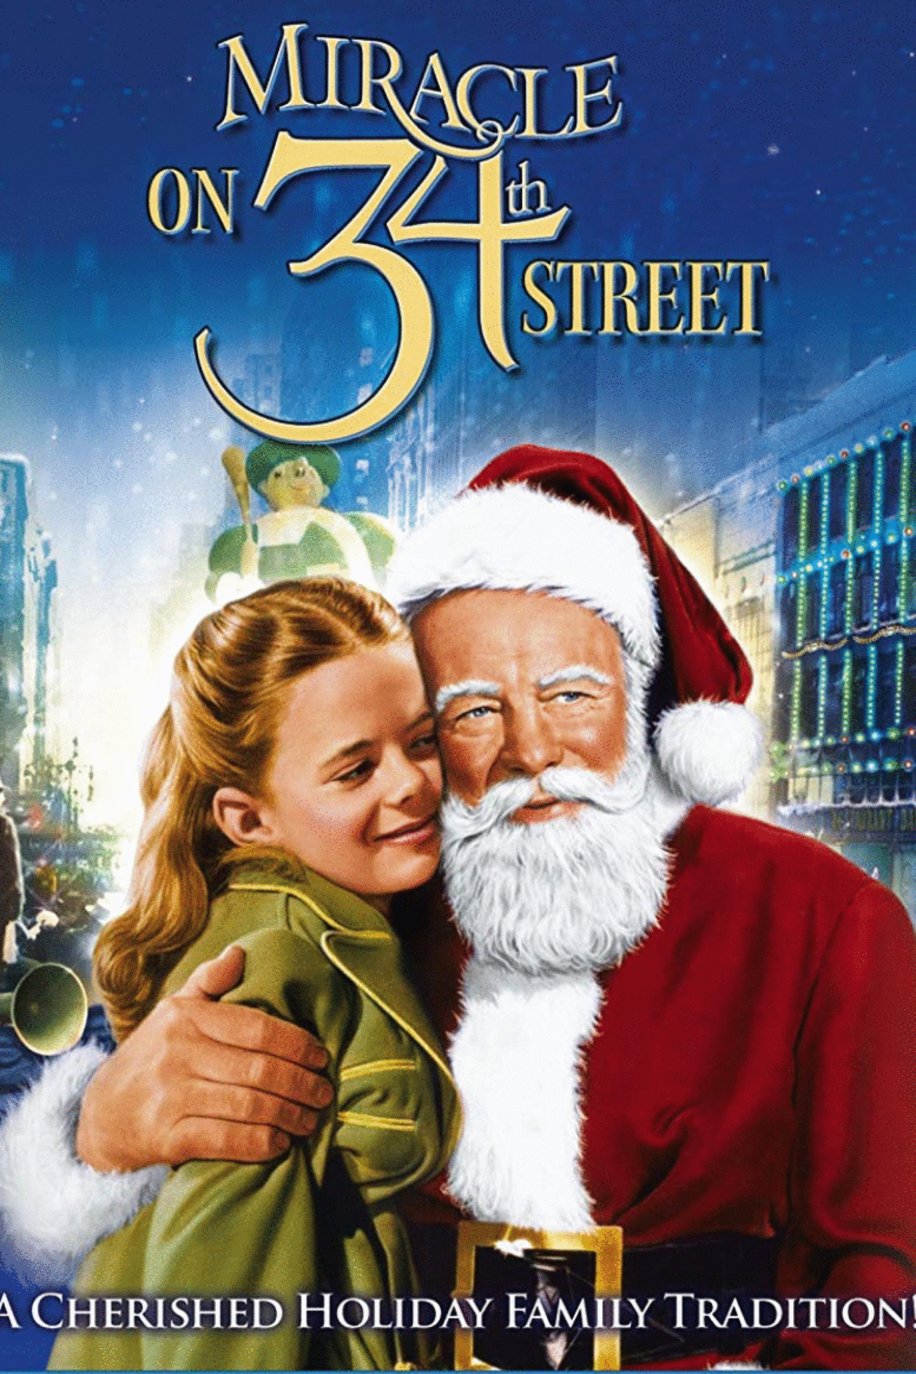 L'affiche du film Miracle on 34th Street